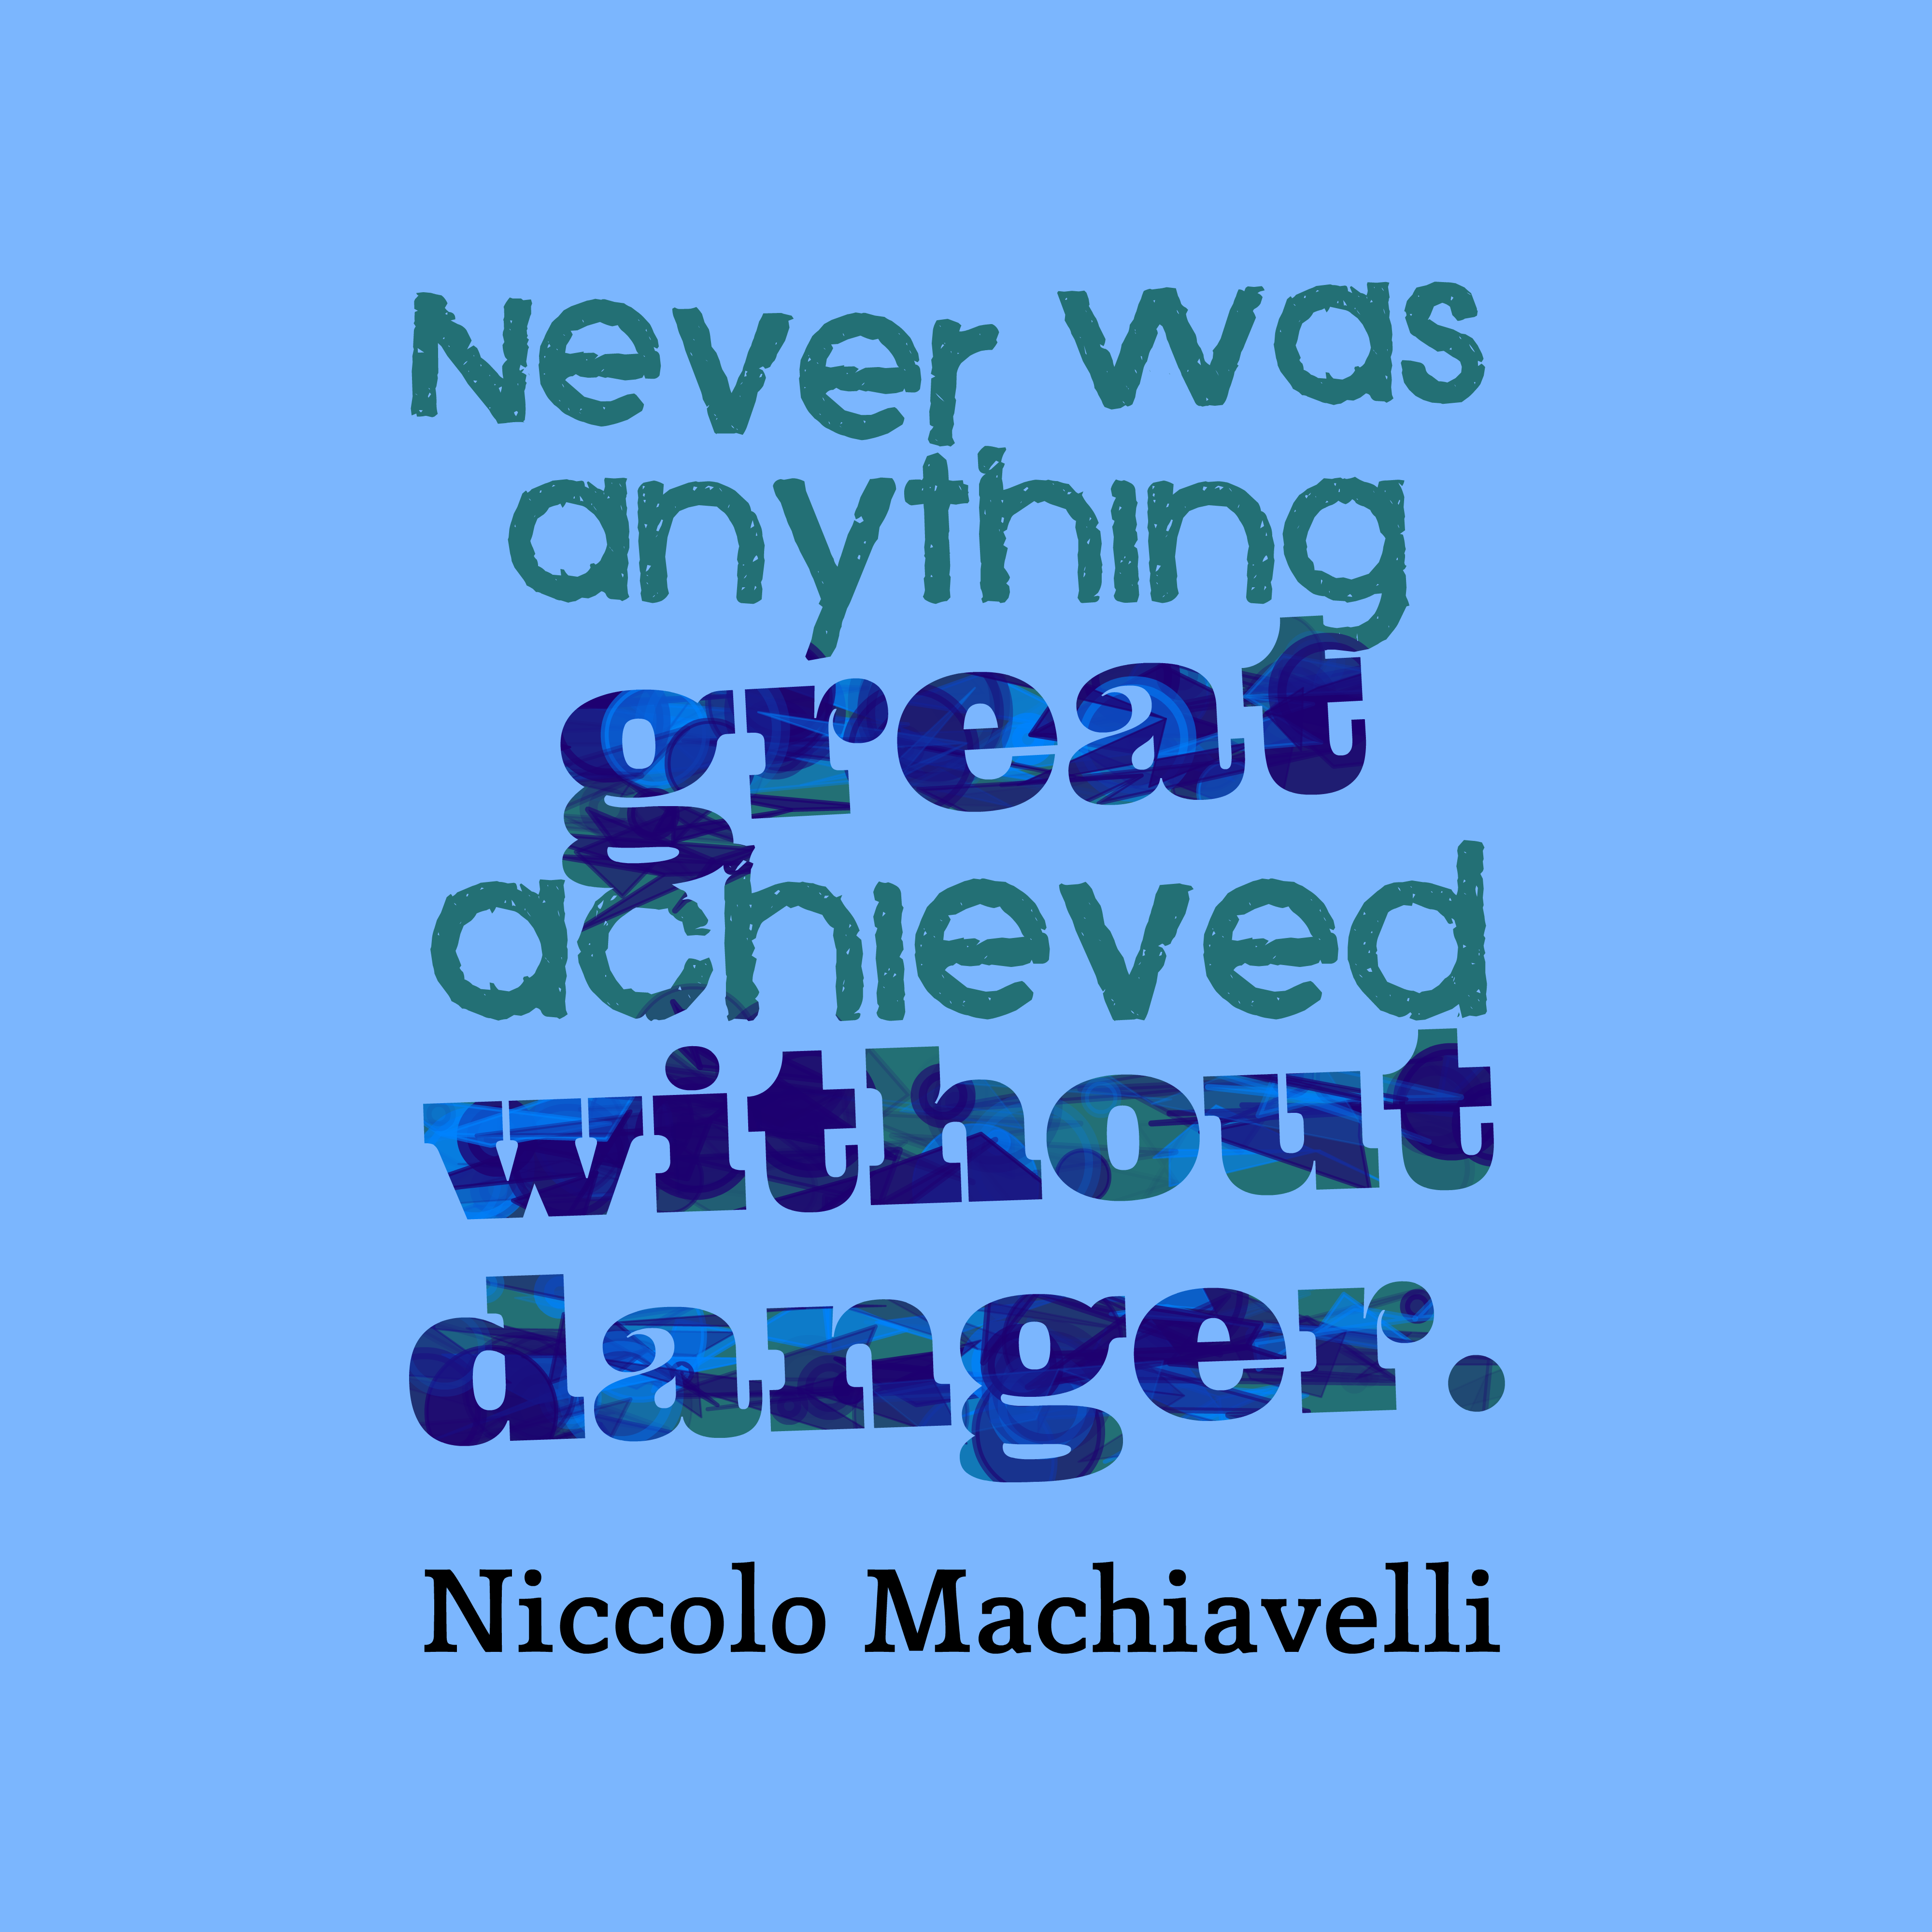 Never was anything great achieved without danger. Niccolo Machiavelli